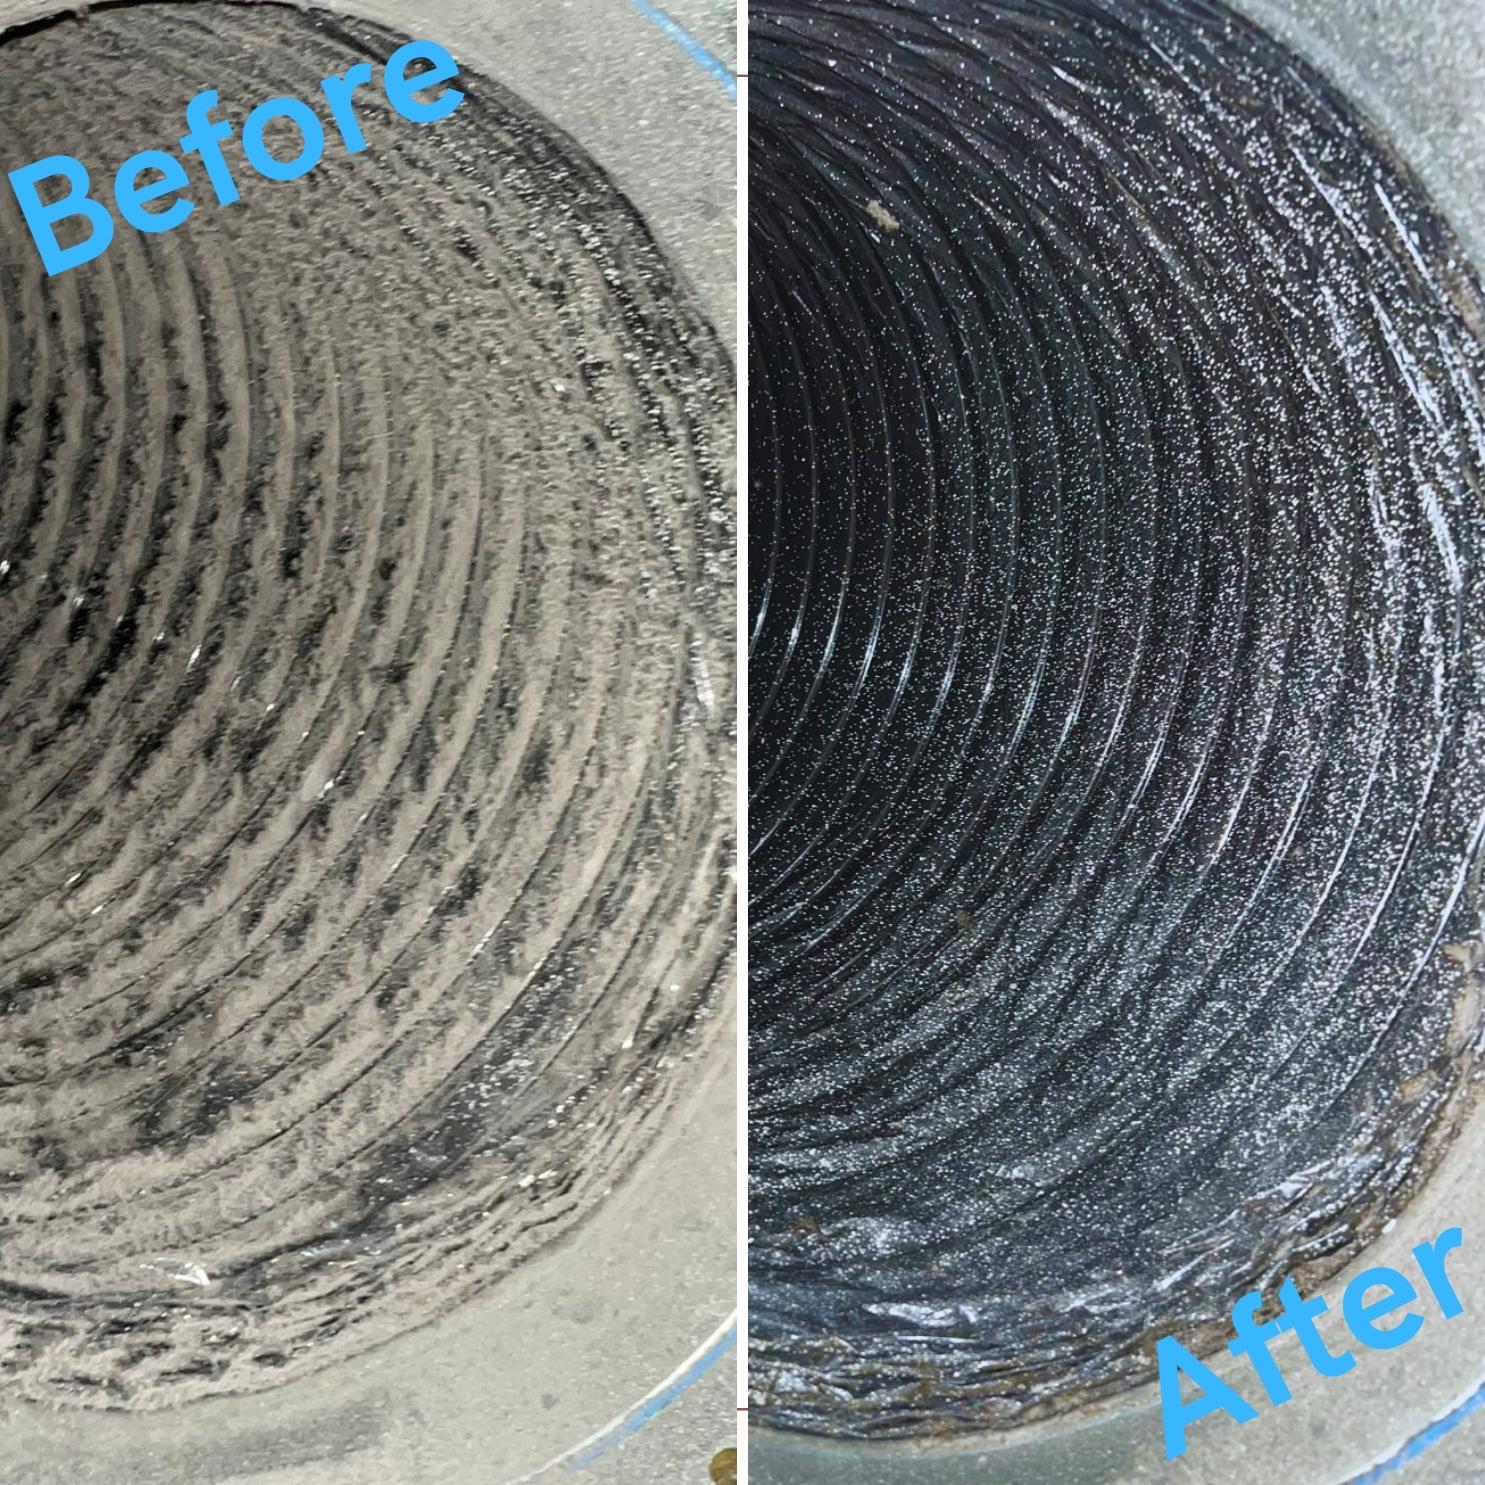 b&a duct cleaning